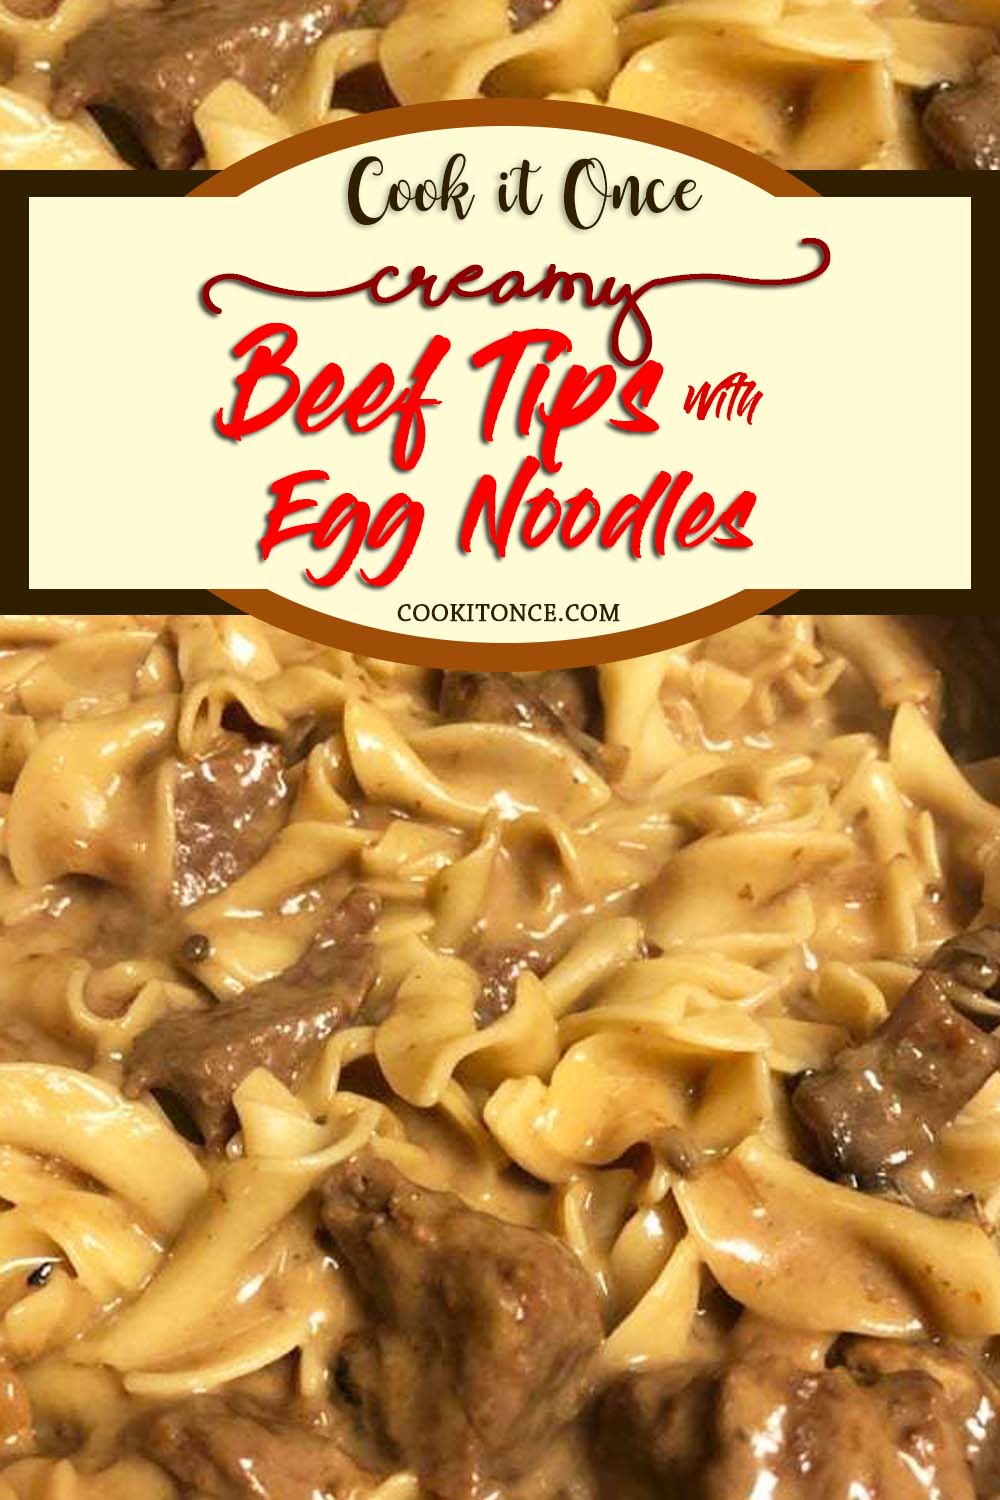 Beef Tips and Egg Noodles Recipe